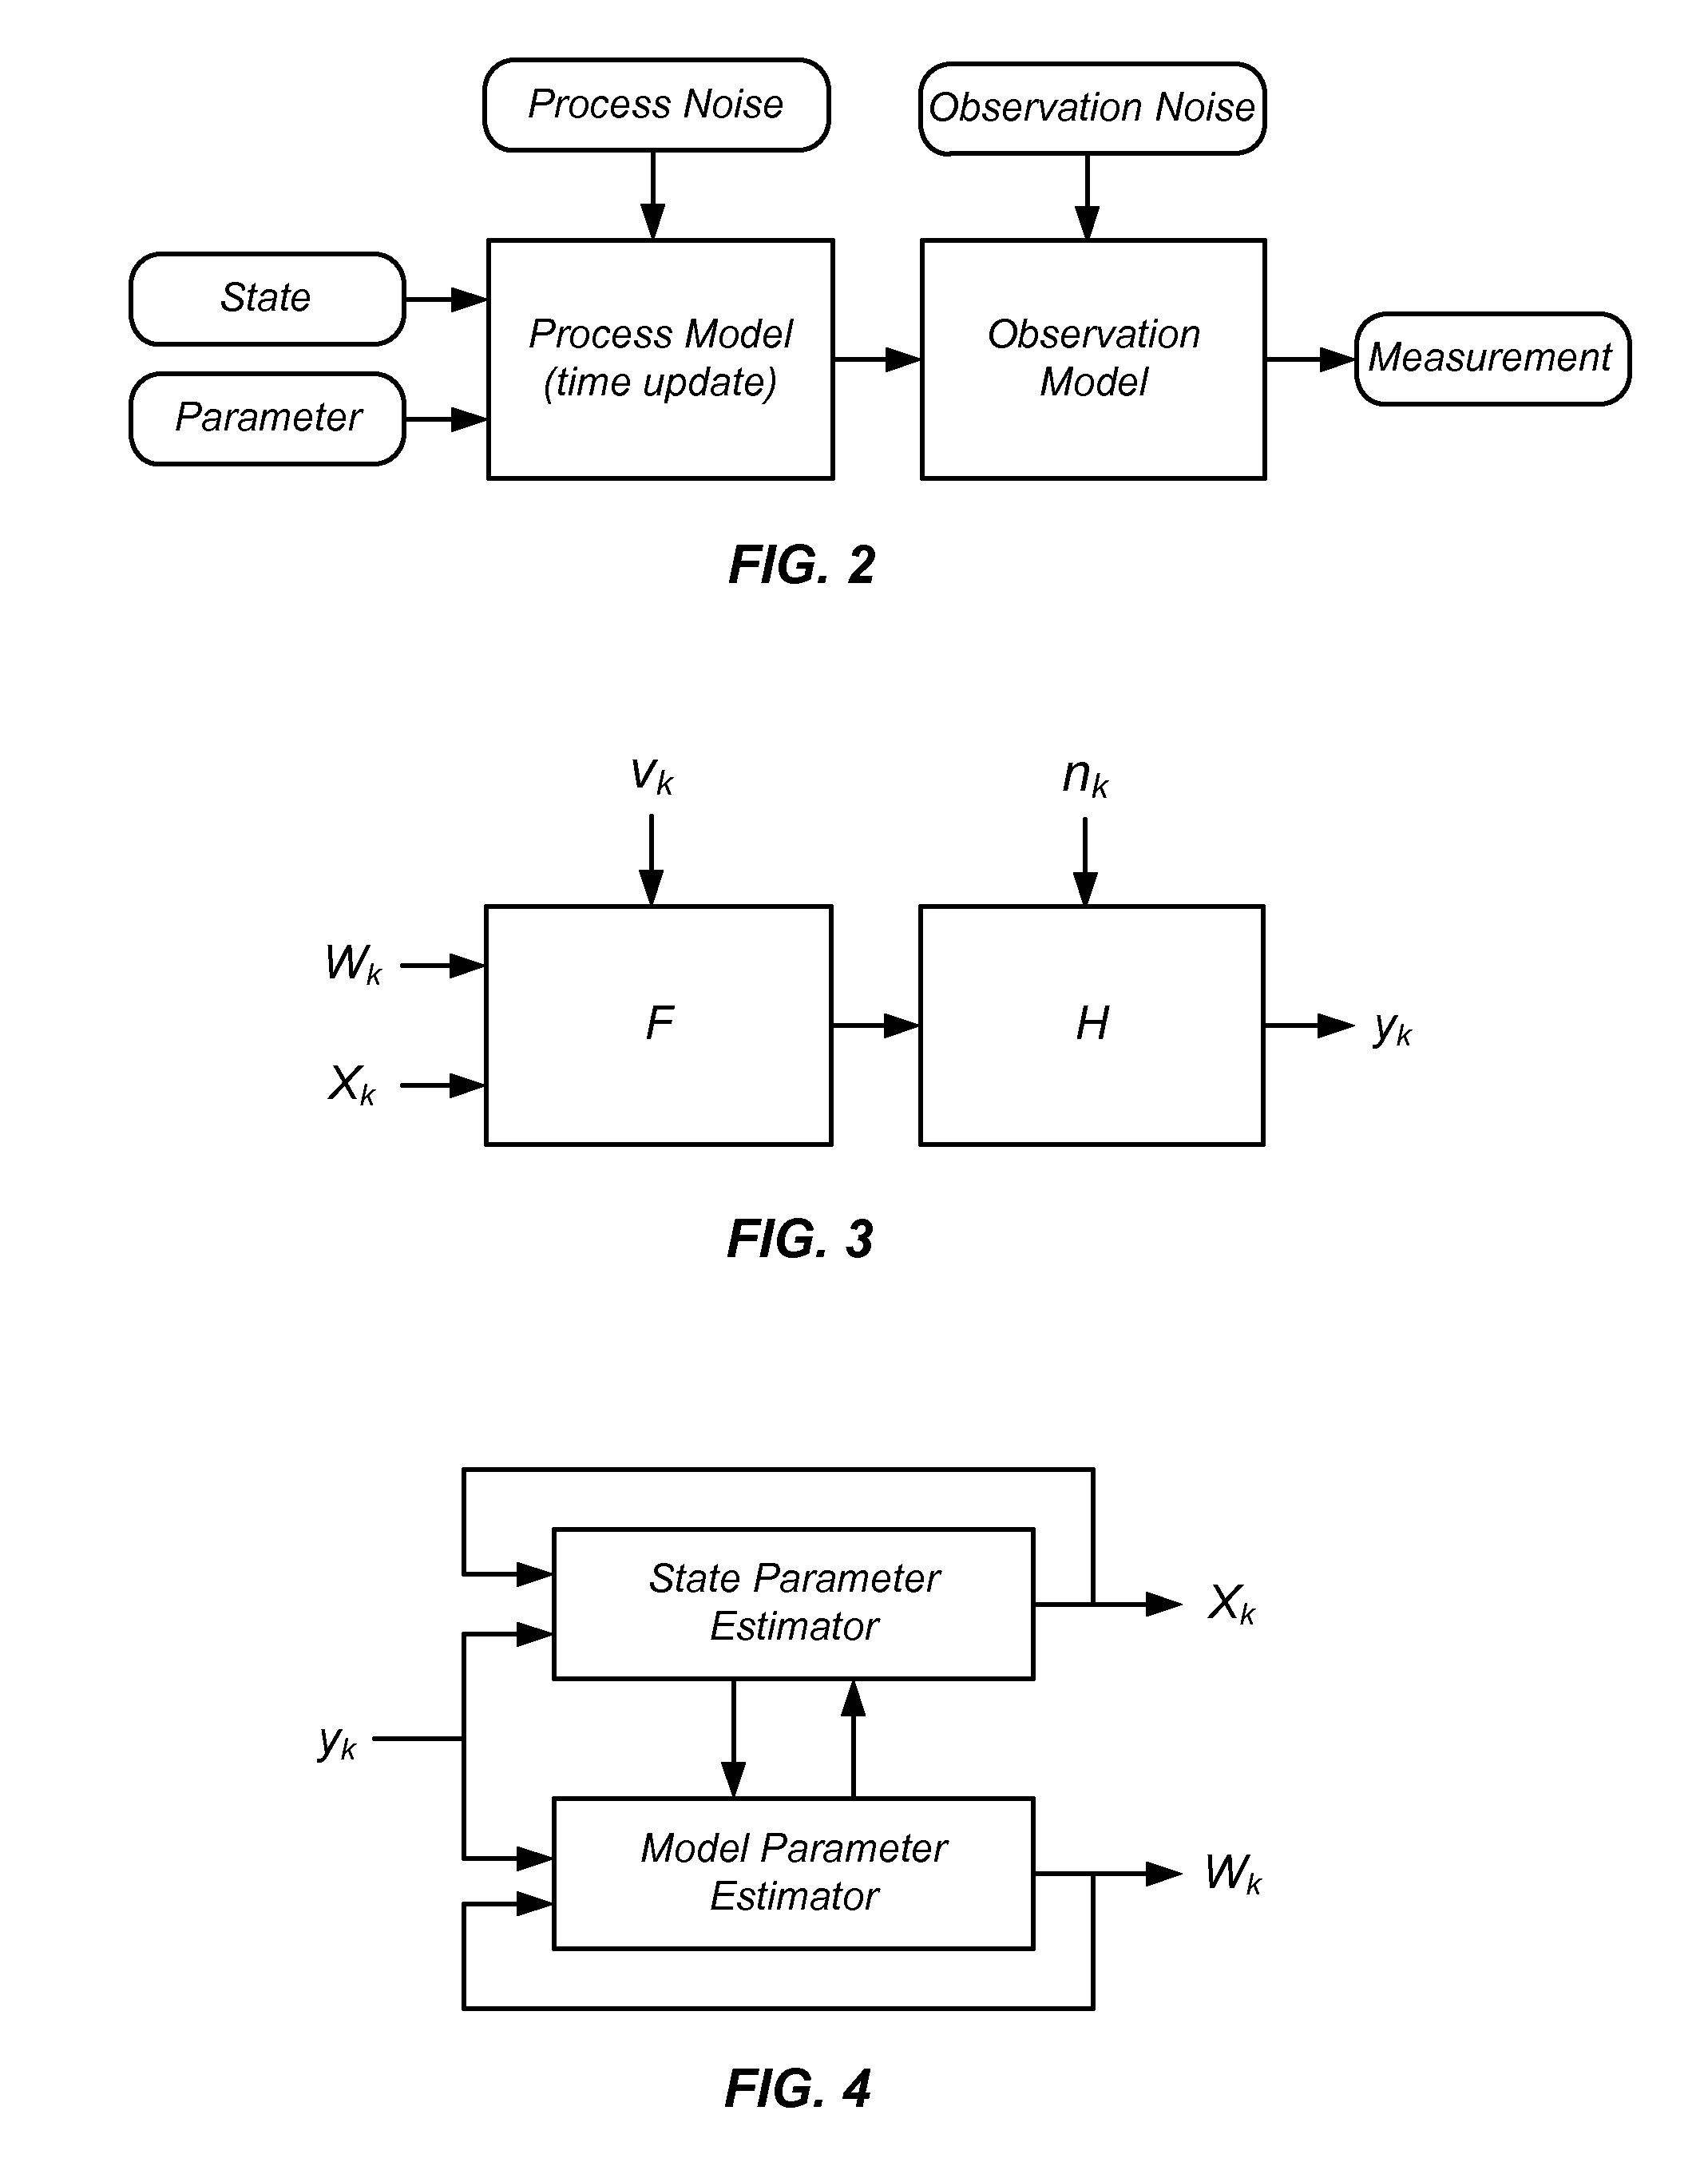 Apparatus for processing physiological sensor data using a physiological model and method of operation therefor